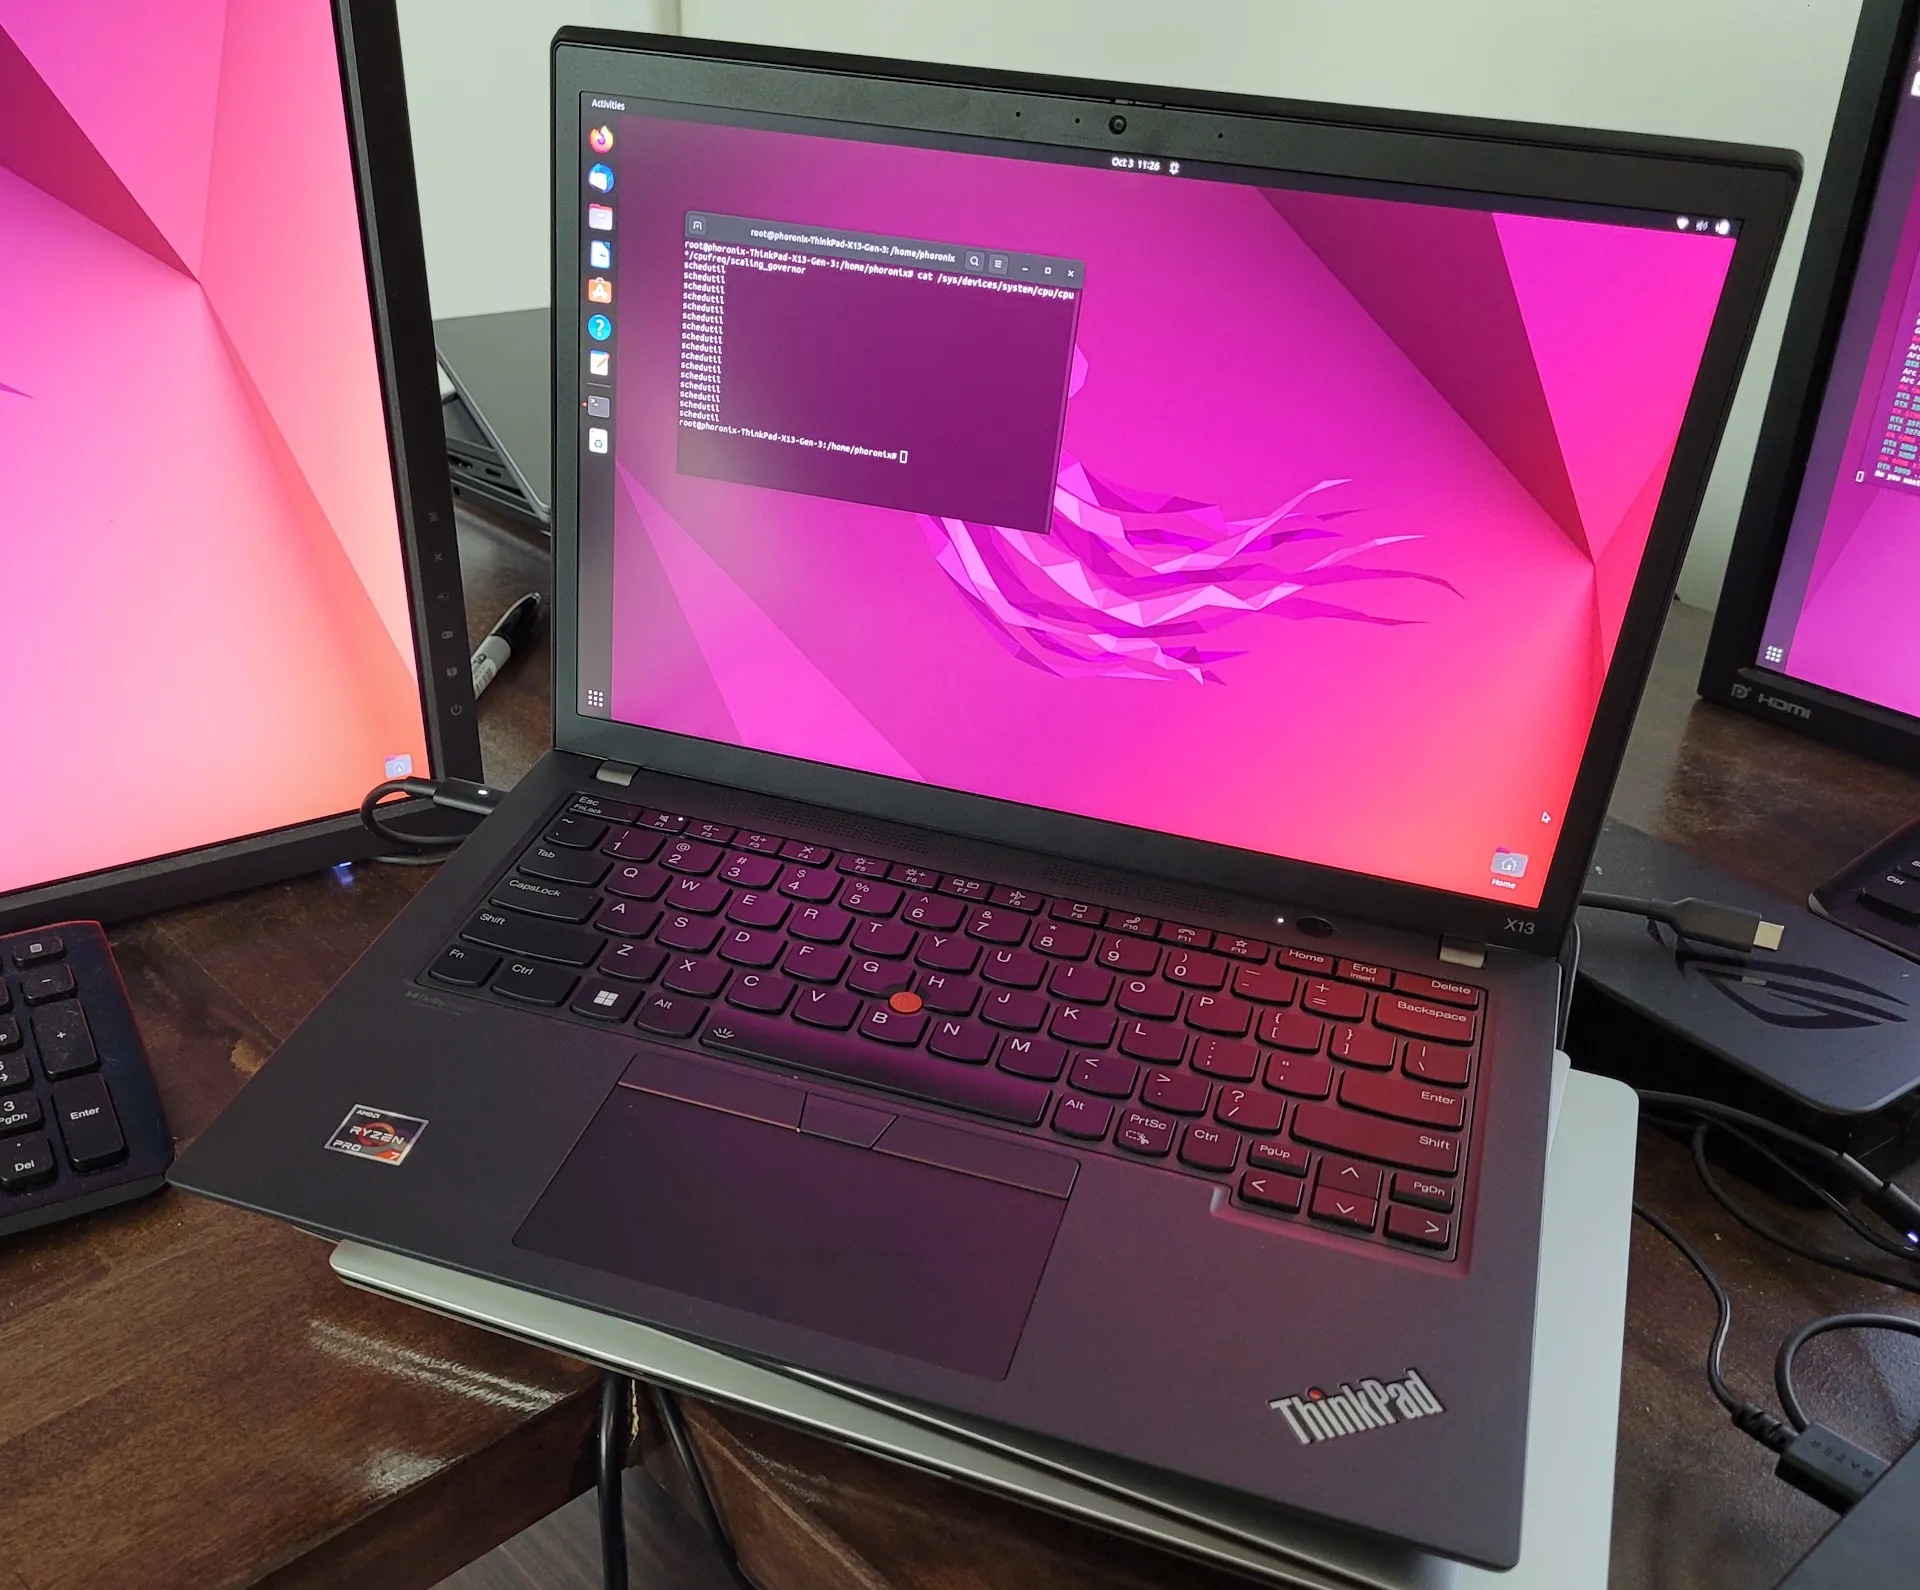 AMD Rembrandt CPUFreq vs. AMD P-State Linux Testing Review